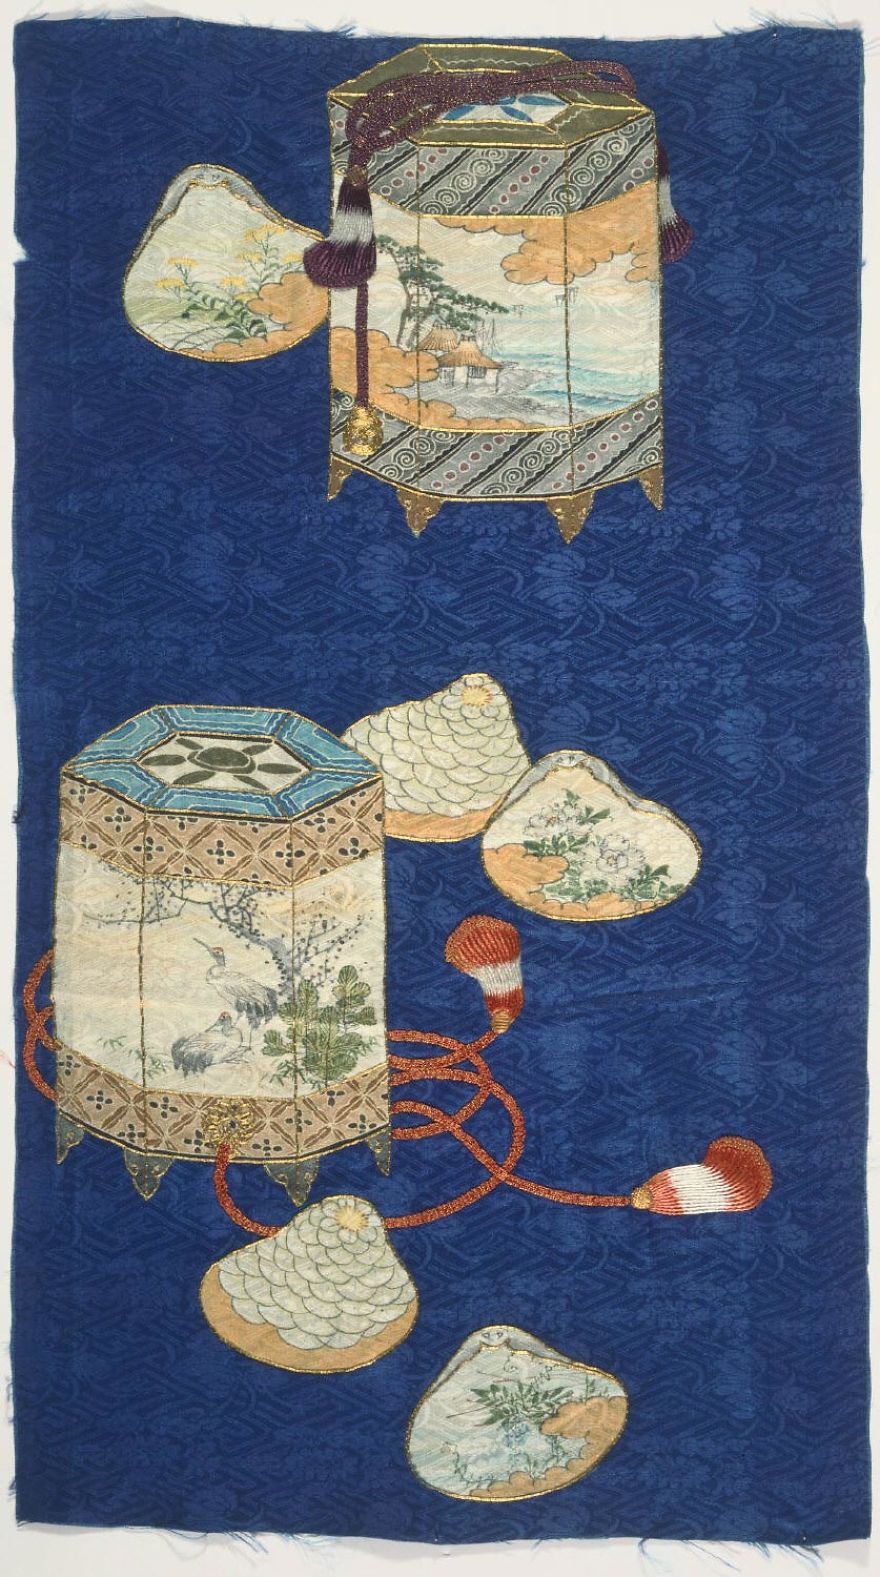 The Clamshell Paintings Of Kai-Awase, An Ancient Japanese Matching Game